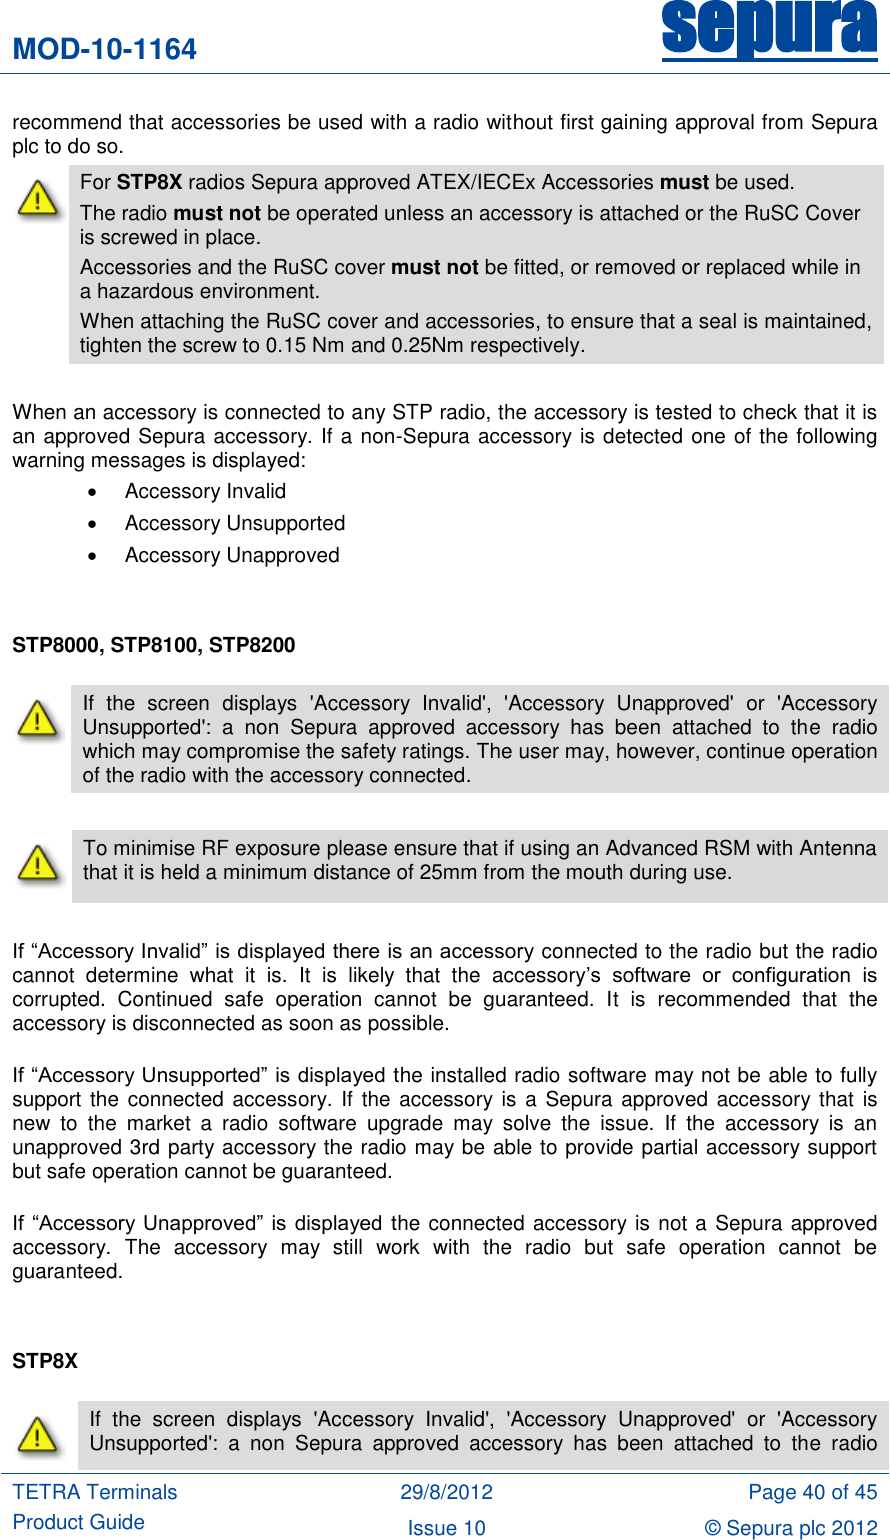 MOD-10-1164 sepura  TETRA Terminals Product Guide 29/8/2012 Page 40 of 45 Issue 10 © Sepura plc 2012   recommend that accessories be used with a radio without first gaining approval from Sepura plc to do so.  For STP8X radios Sepura approved ATEX/IECEx Accessories must be used. The radio must not be operated unless an accessory is attached or the RuSC Cover is screwed in place.  Accessories and the RuSC cover must not be fitted, or removed or replaced while in a hazardous environment. When attaching the RuSC cover and accessories, to ensure that a seal is maintained, tighten the screw to 0.15 Nm and 0.25Nm respectively.  When an accessory is connected to any STP radio, the accessory is tested to check that it is an approved Sepura accessory. If a non-Sepura accessory is detected one of the following warning messages is displayed:   Accessory Invalid   Accessory Unsupported   Accessory Unapproved   STP8000, STP8100, STP8200   To minimise RF exposure please ensure that if using an Advanced RSM with Antenna that it is held a minimum distance of 25mm from the mouth during use.  If “Accessory Invalid” is displayed there is an accessory connected to the radio but the radio cannot  determine  what  it  is.  It  is  likely  that  the  accessory‟s  software  or  configuration  is corrupted.  Continued  safe  operation  cannot  be  guaranteed.  It  is  recommended  that  the accessory is disconnected as soon as possible.  If “Accessory Unsupported” is displayed the installed radio software may not be able to fully support the connected  accessory. If the  accessory is a Sepura approved  accessory  that is new  to  the  market  a  radio  software  upgrade  may  solve  the  issue.  If  the  accessory  is  an unapproved 3rd party accessory the radio may be able to provide partial accessory support but safe operation cannot be guaranteed.  If  “Accessory Unapproved”  is  displayed the connected accessory is not a Sepura approved accessory.  The  accessory  may  still  work  with  the  radio  but  safe  operation  cannot  be guaranteed.   STP8X   If  the  screen  displays  &apos;Accessory  Invalid&apos;,  &apos;Accessory  Unapproved&apos;  or  &apos;Accessory Unsupported&apos;:  a  non  Sepura  approved  accessory  has  been  attached  to  the  radio which may compromise the safety ratings. The user may, however, continue operation of the radio with the accessory connected.  If  the  screen  displays  &apos;Accessory  Invalid&apos;,  &apos;Accessory  Unapproved&apos;  or  &apos;Accessory Unsupported&apos;:  a  non  Sepura  approved  accessory  has  been  attached  to  the  radio 